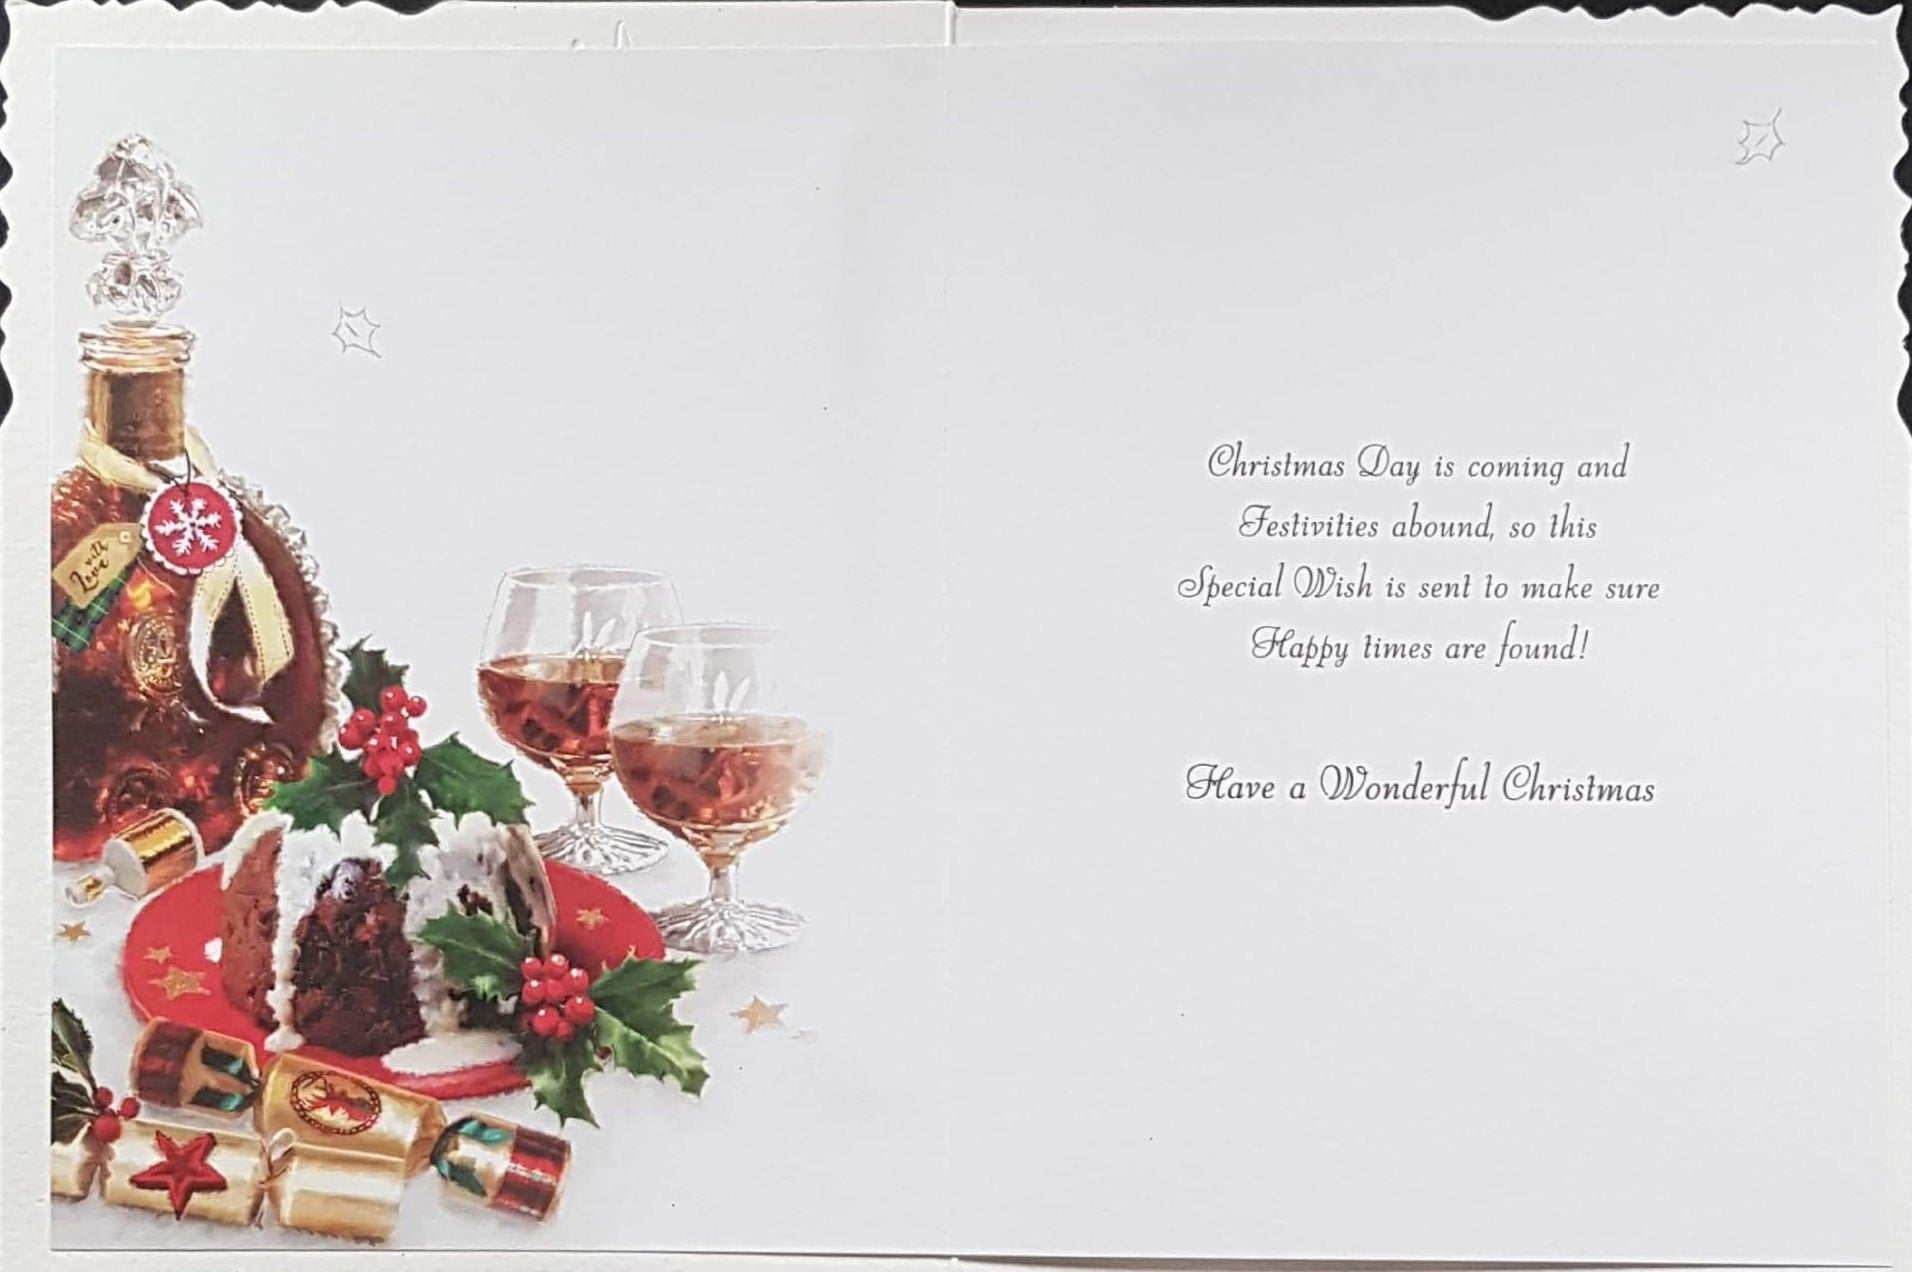 General Christmas Card - Christmas Wishes For You & Scotch & Pudding